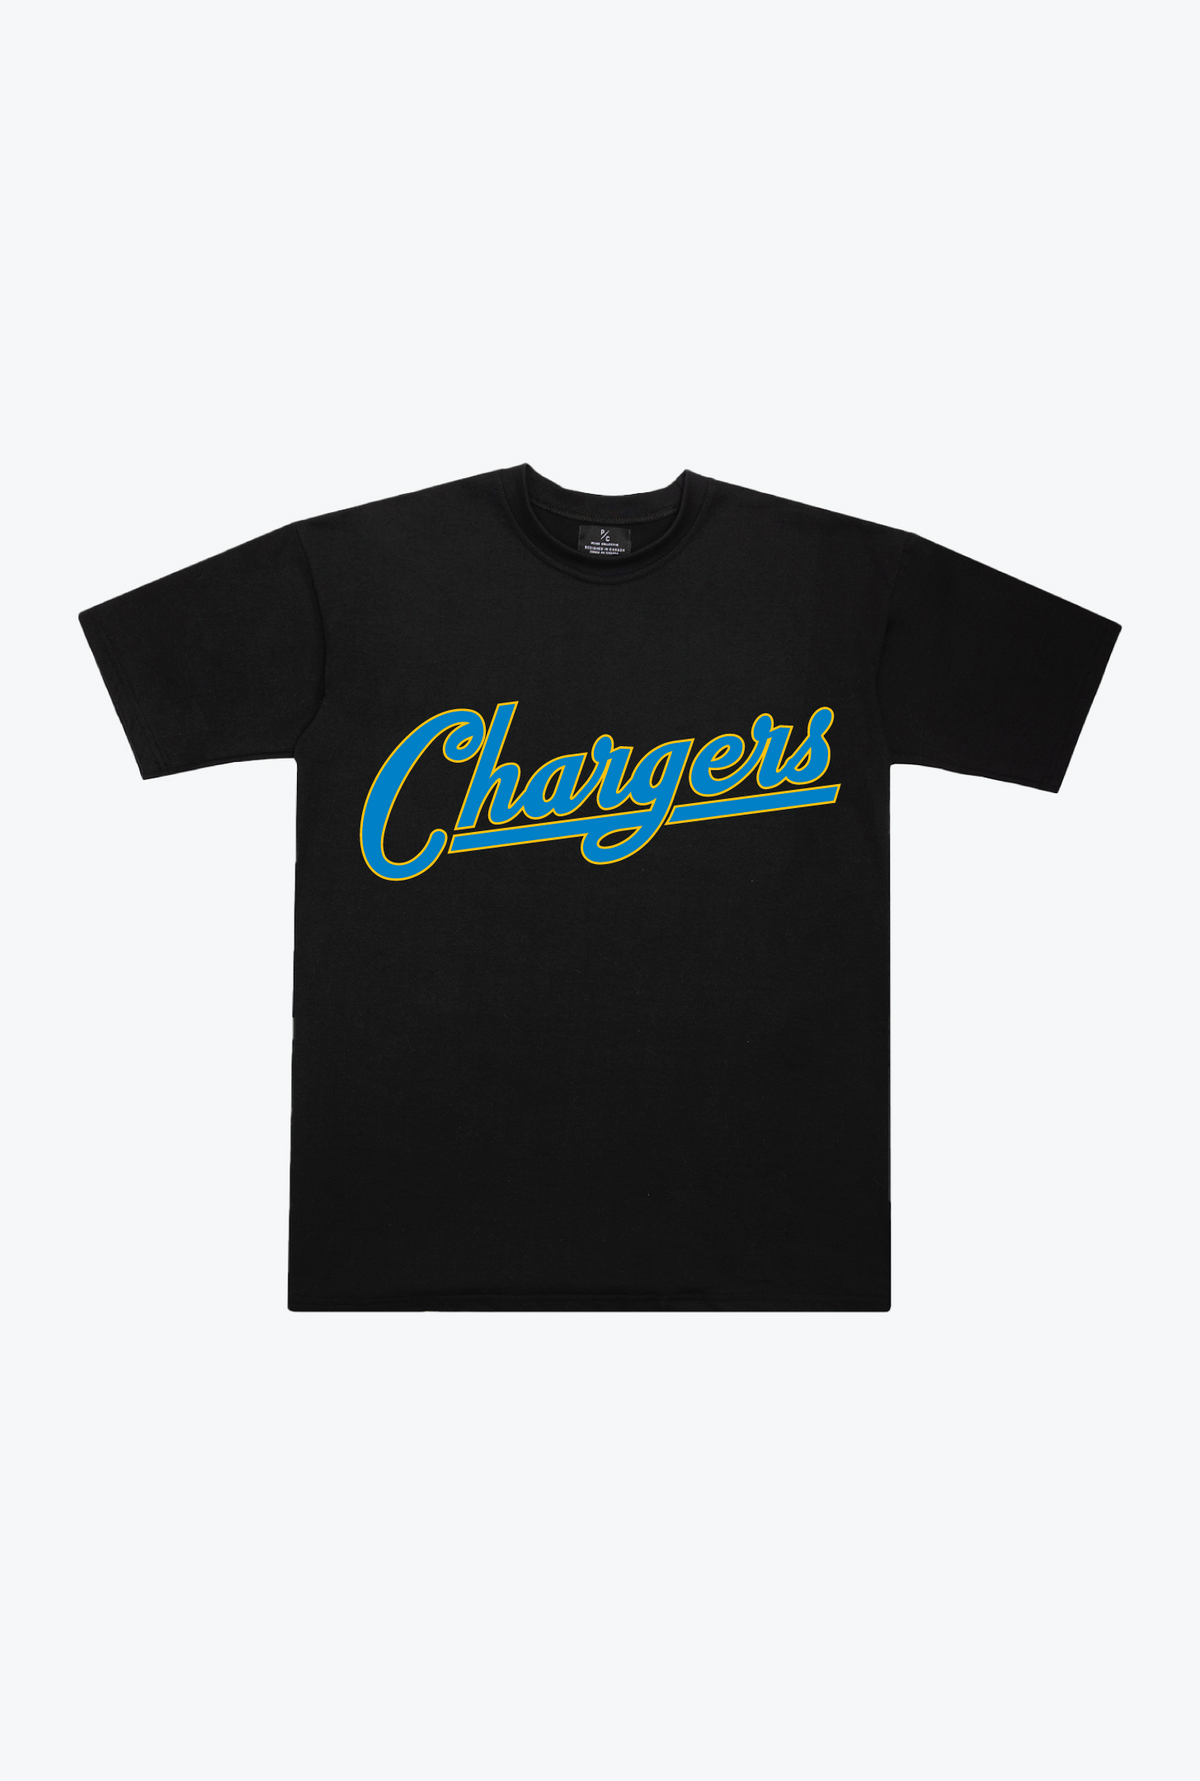 Los Angeles Chargers Heavyweight T-Shirt - Black